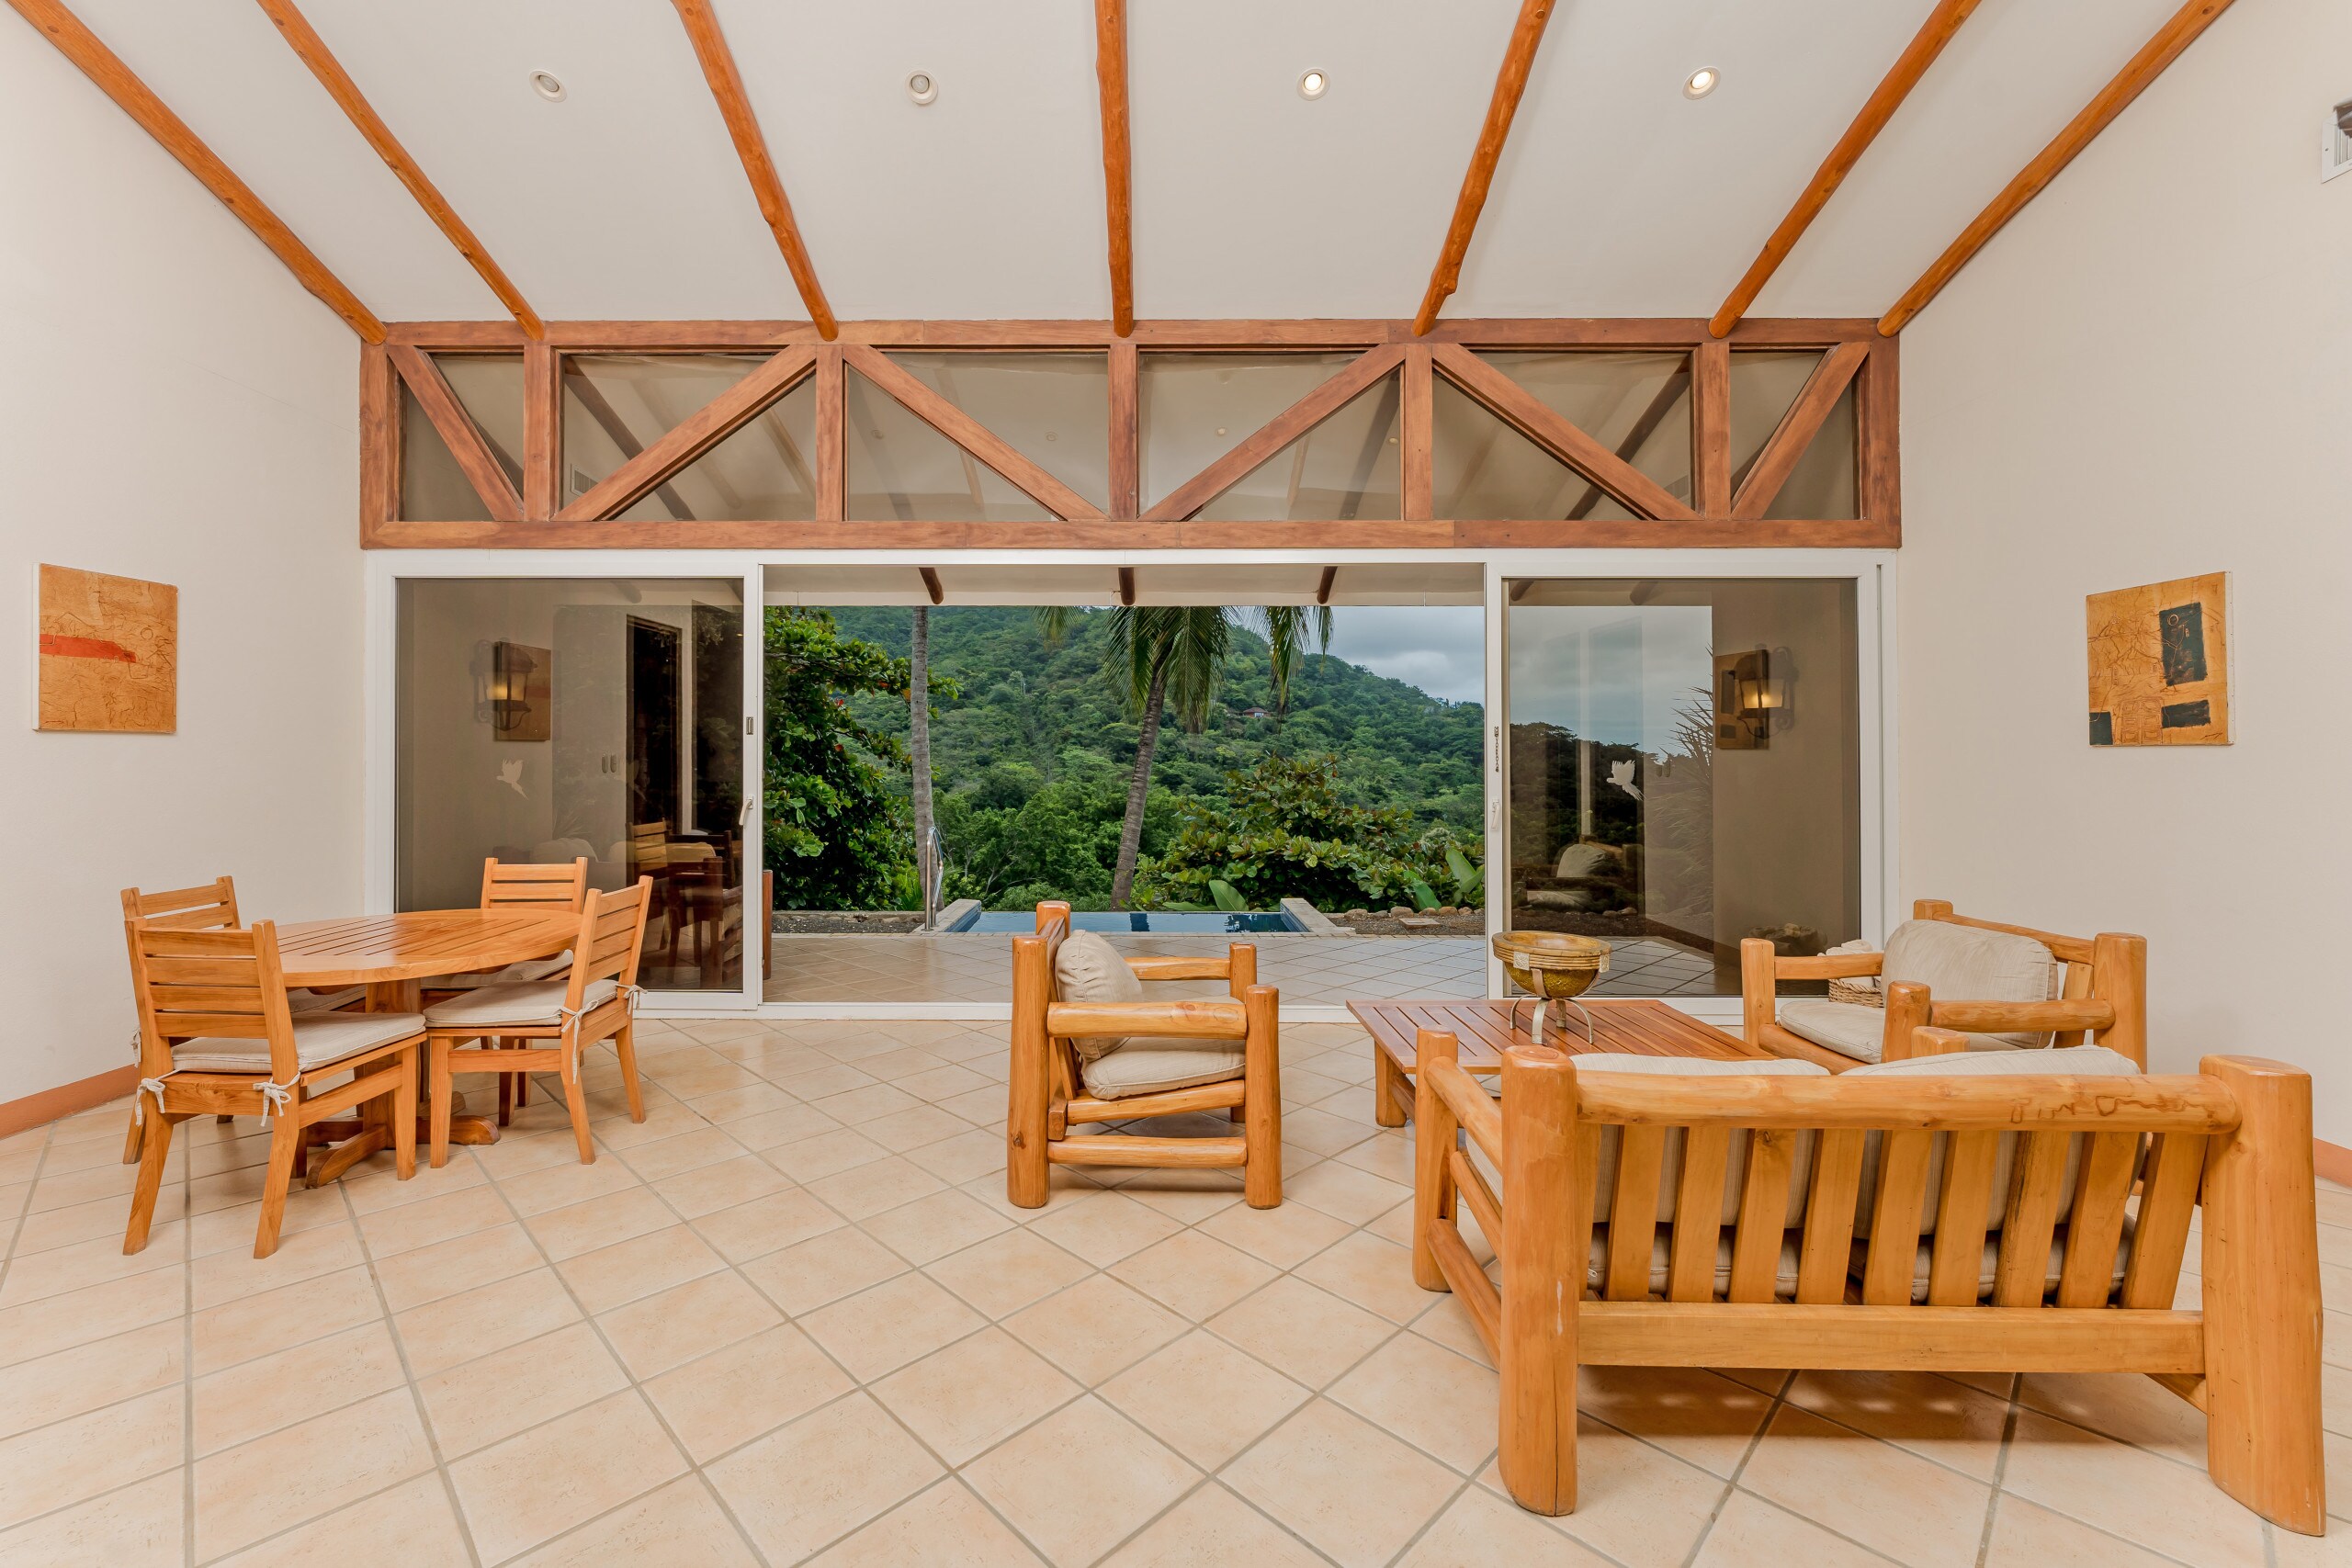 Ceiba, charming, private, and rustic-style 3 bedroom villa